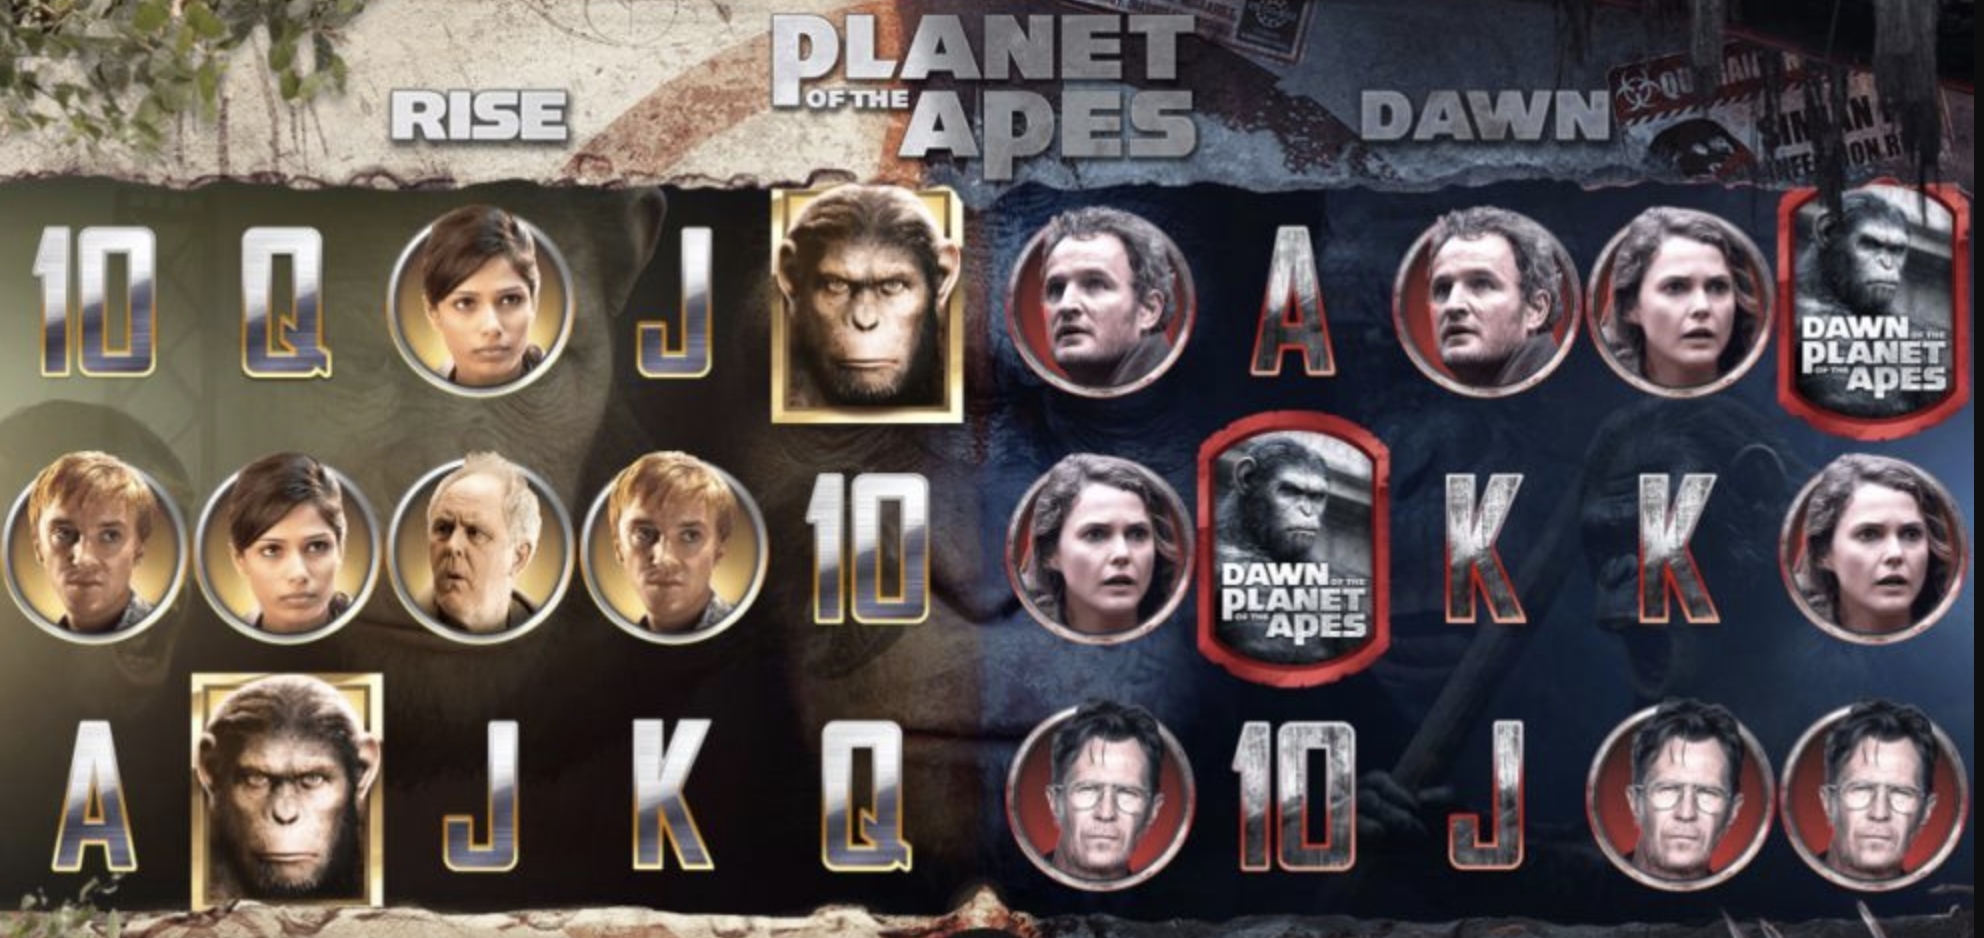 Planet of the Apes gambling game